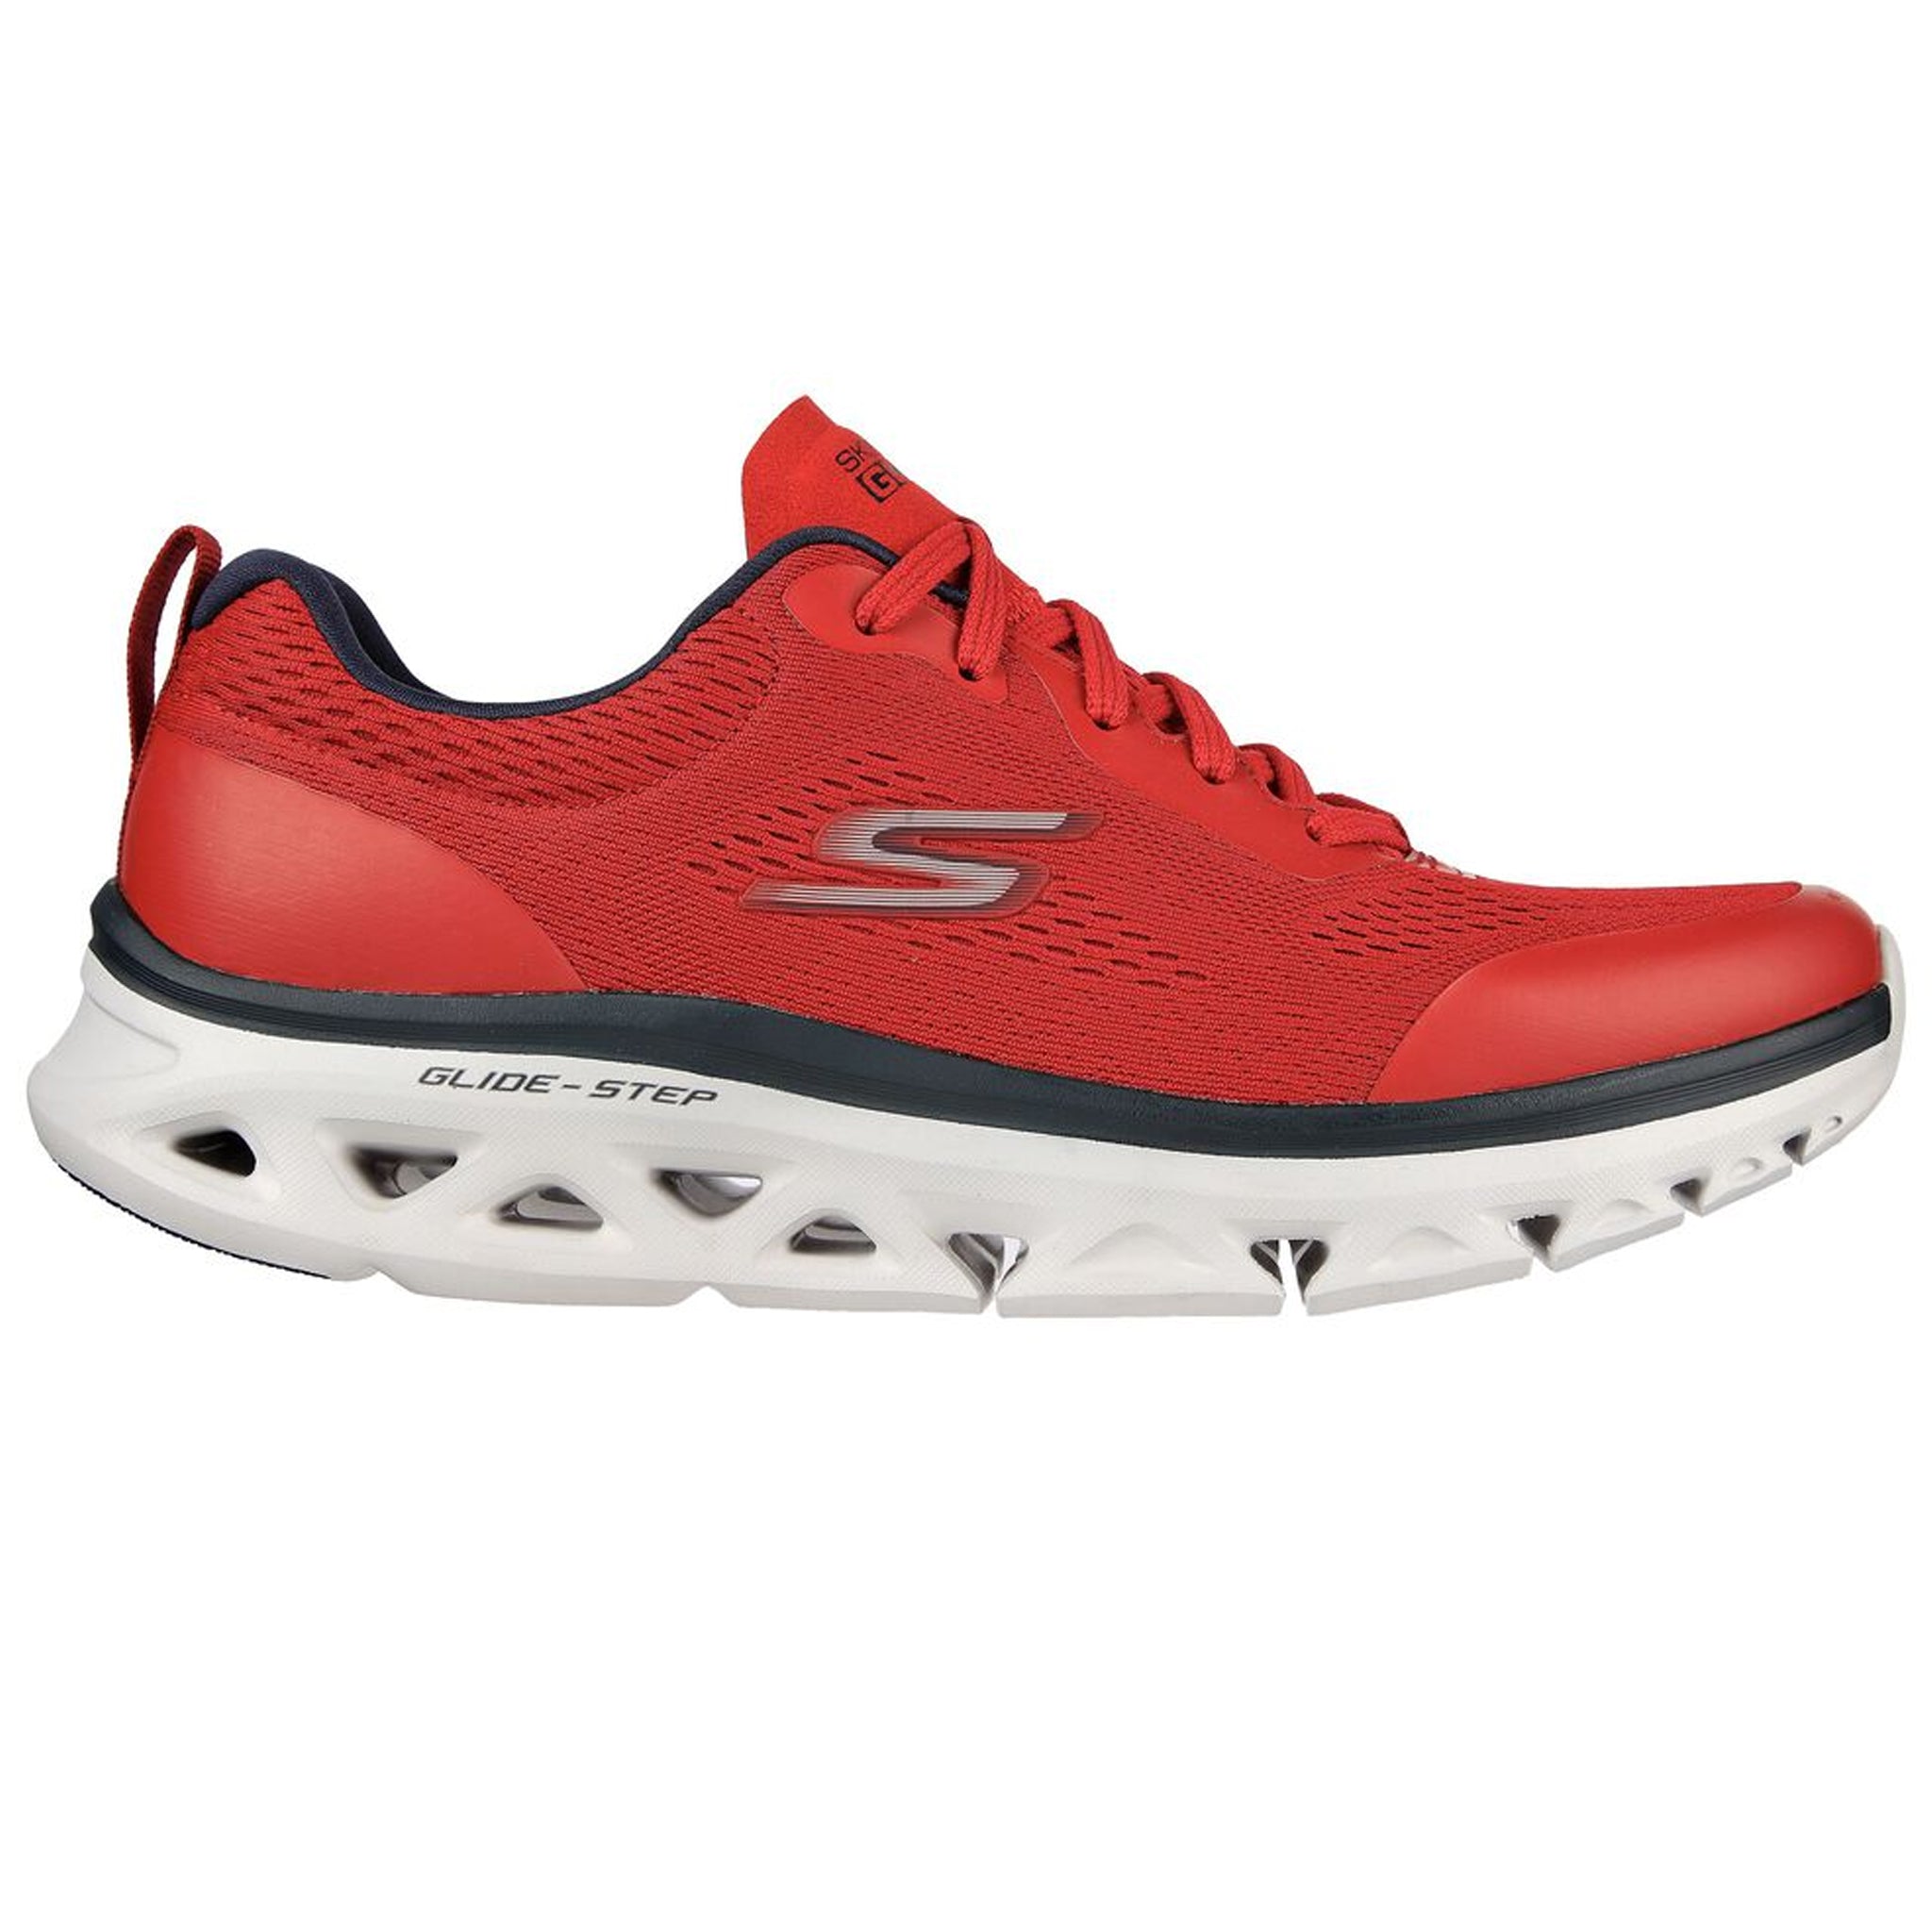 Skechers 220503 GO RUN Flex Running Shoes – That Shoe Store and More